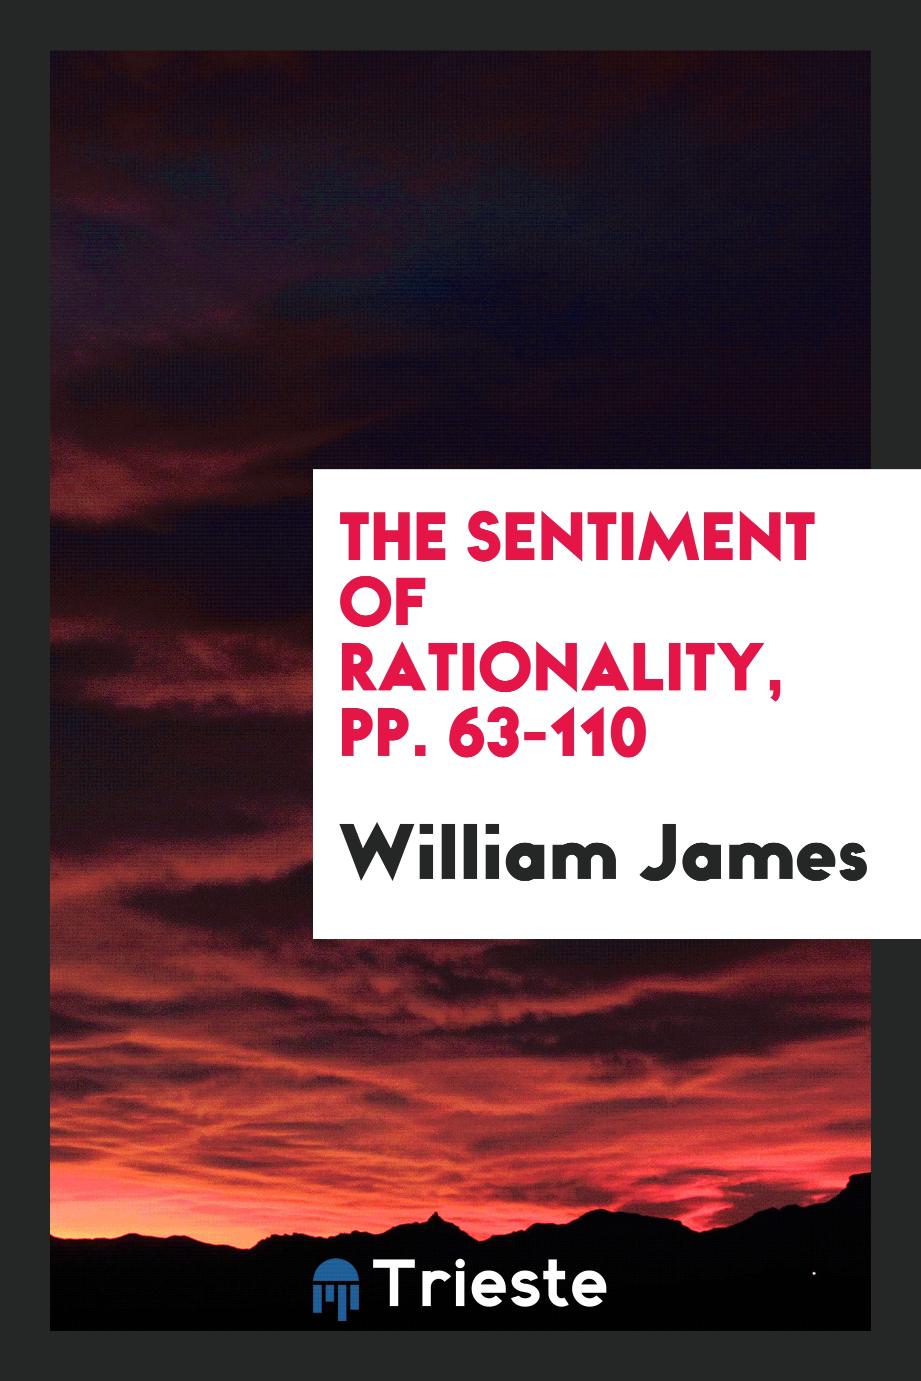 The Sentiment of Rationality, pp. 63-110